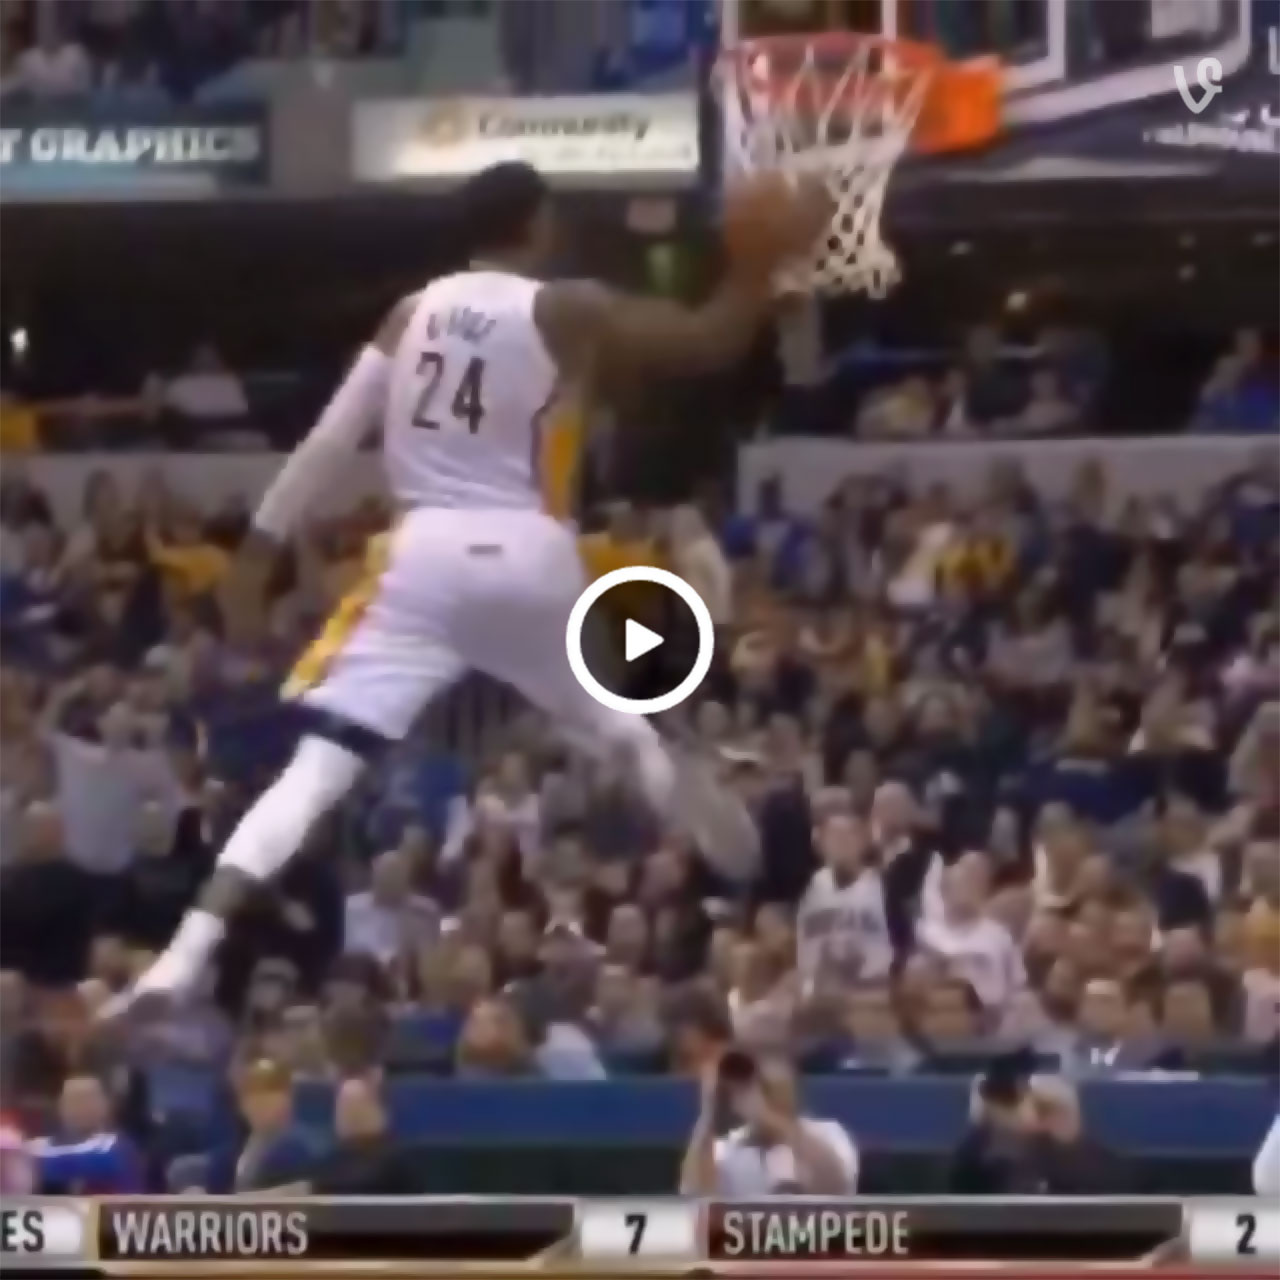 Paul George throws down a windmill dunks during a game